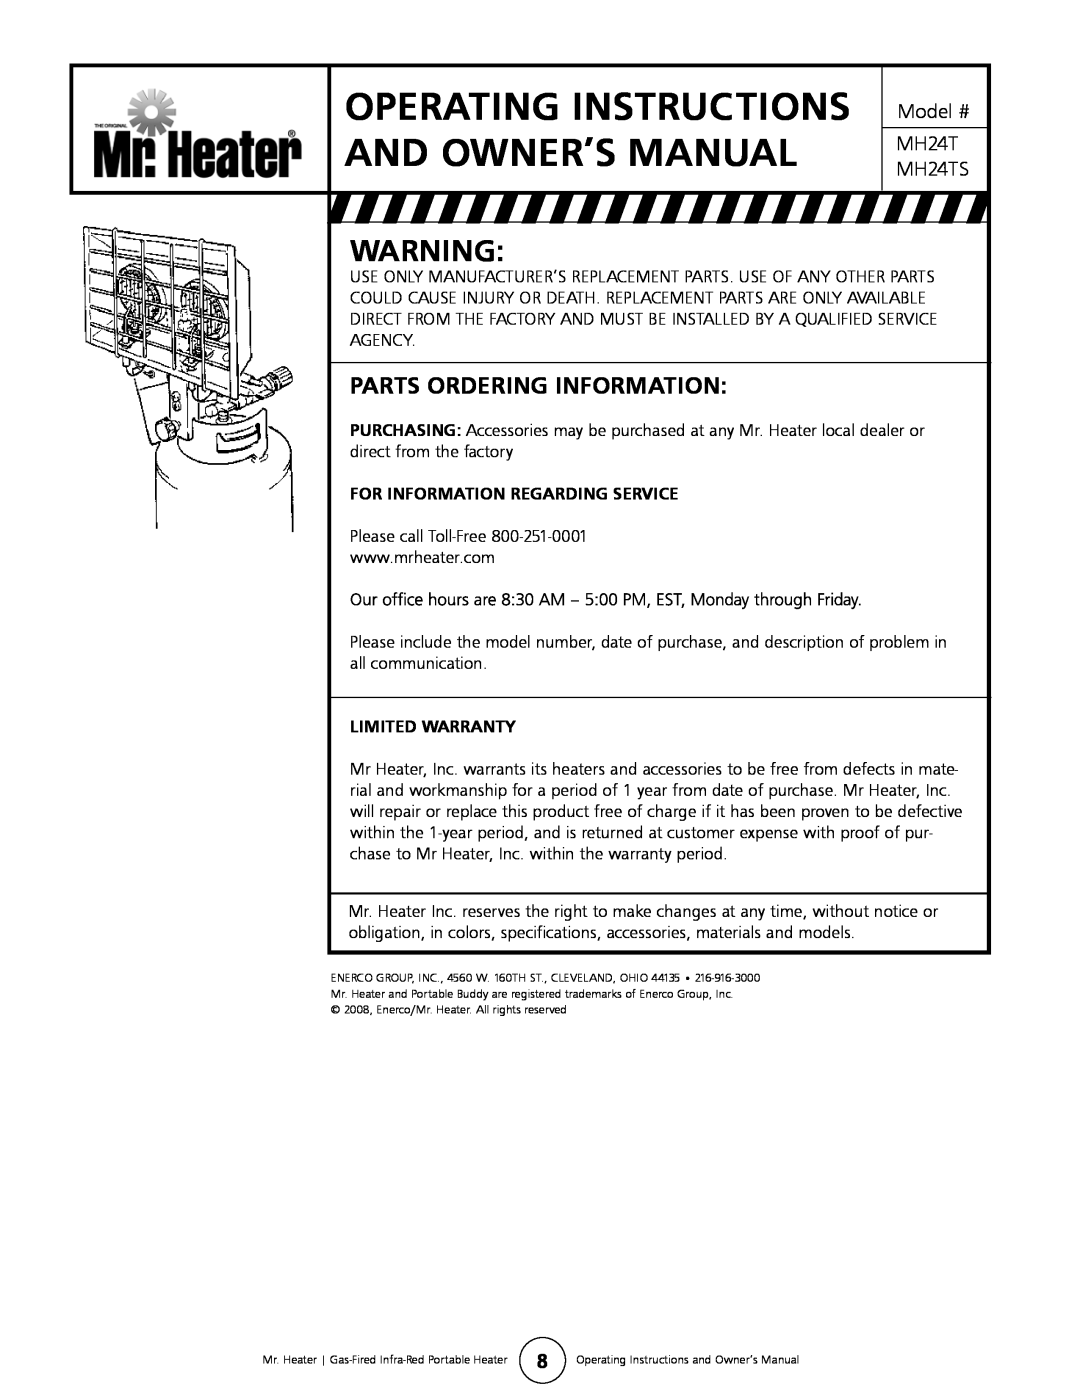 Mr. Heater MH24TS operating instructions Parts Ordering Information, For Information Regarding Service, Limited Warranty 